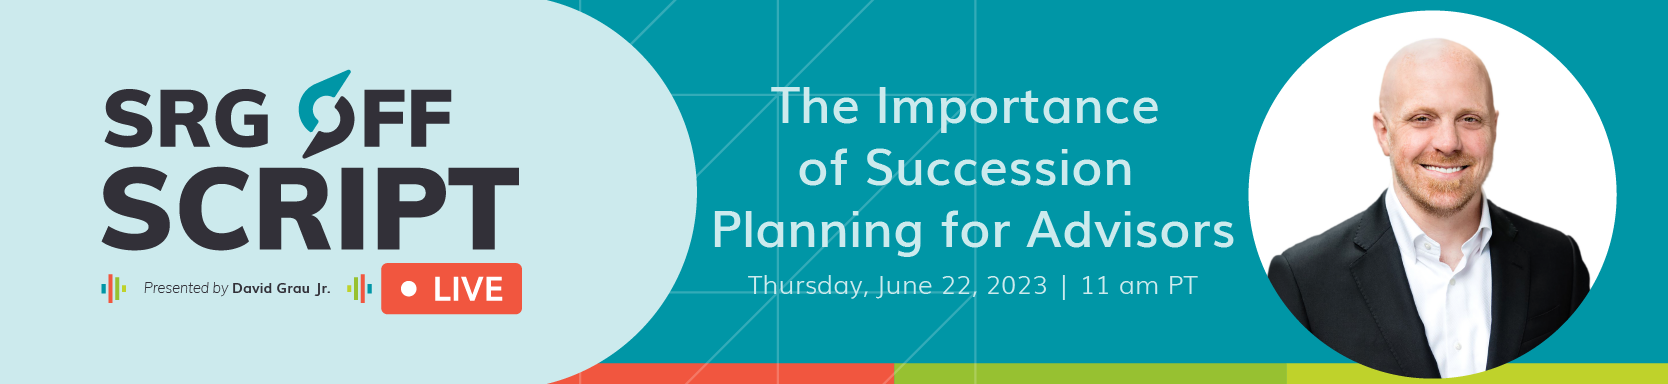 SRG Off Script Webinar - The Importance of Succession Planning for Advisors_Email Banner